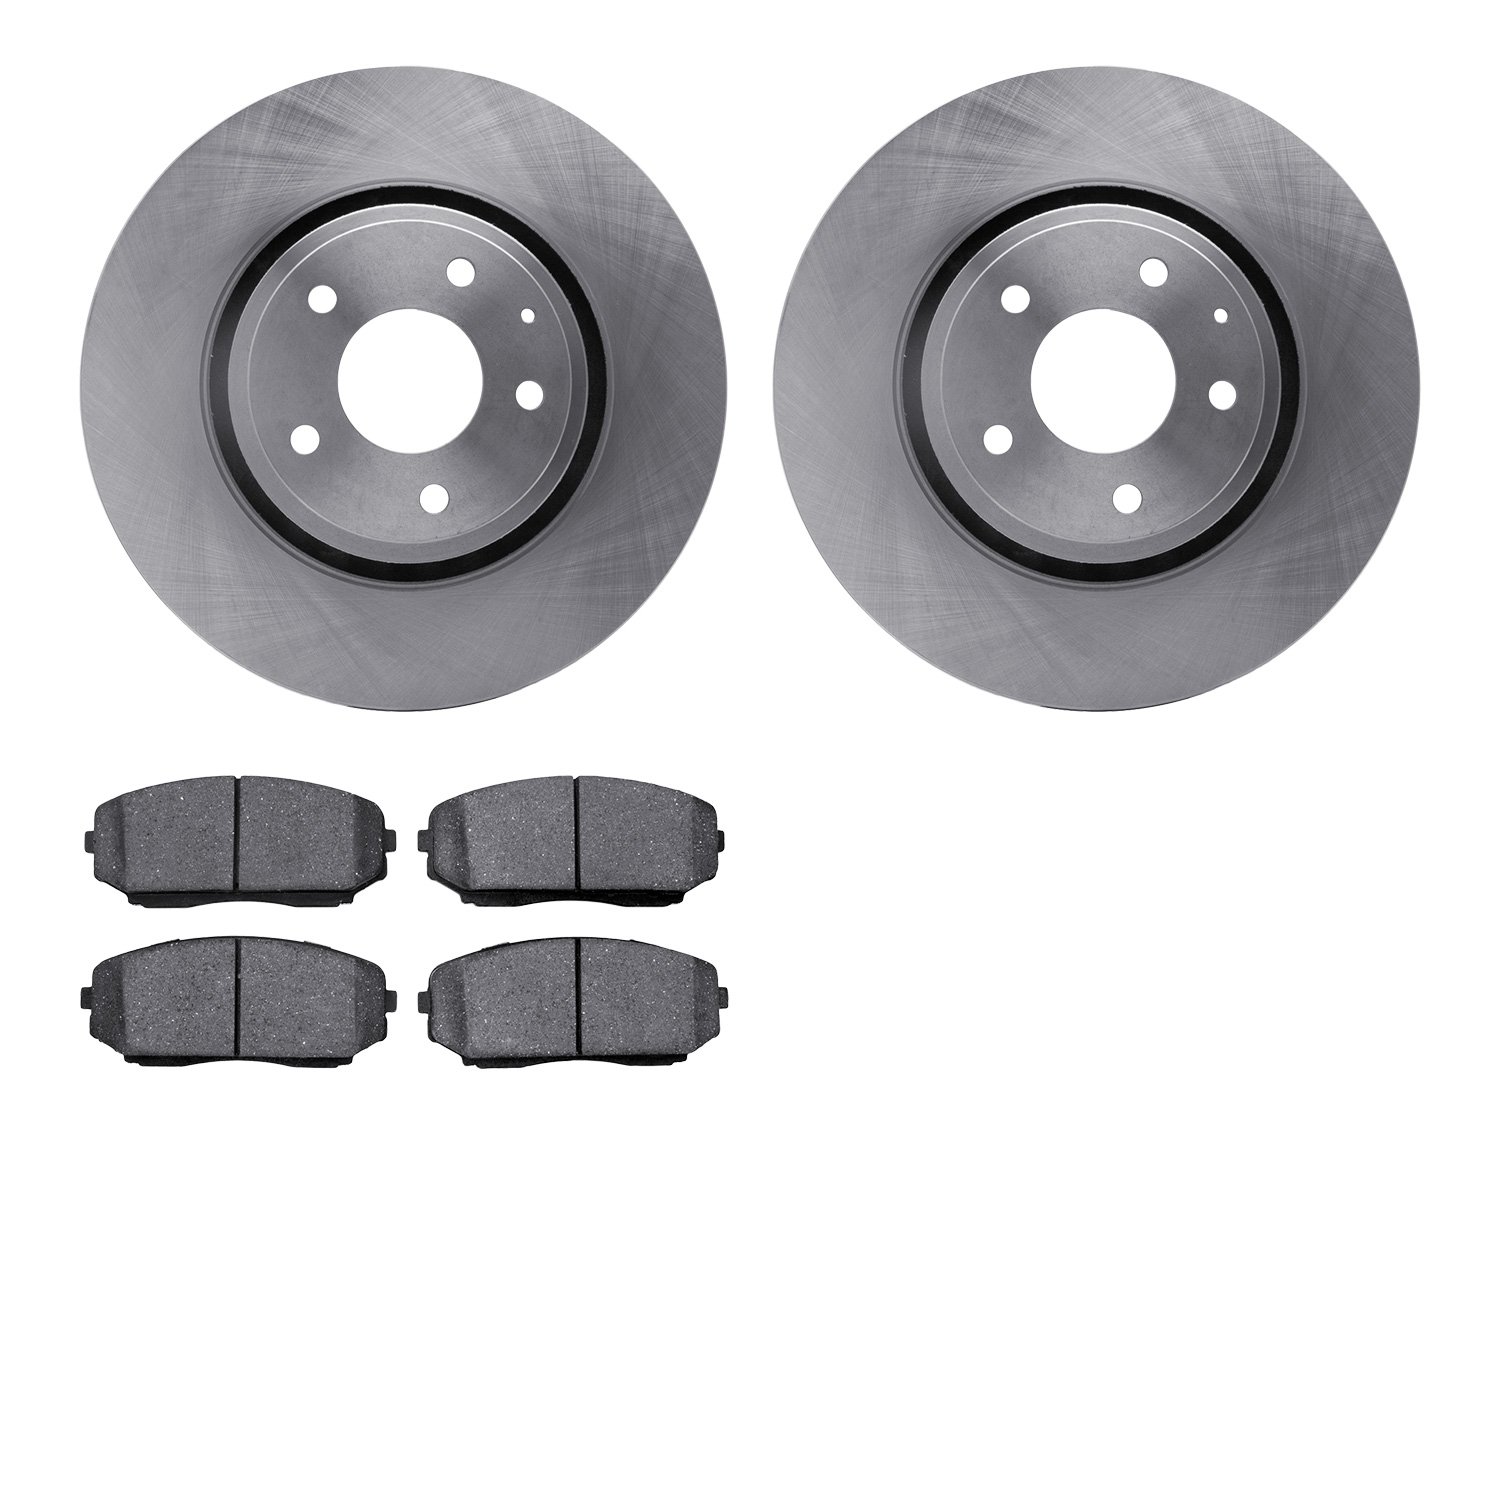 6502-80356 Brake Rotors w/5000 Advanced Brake Pads Kit, Fits Select Ford/Lincoln/Mercury/Mazda, Position: Front